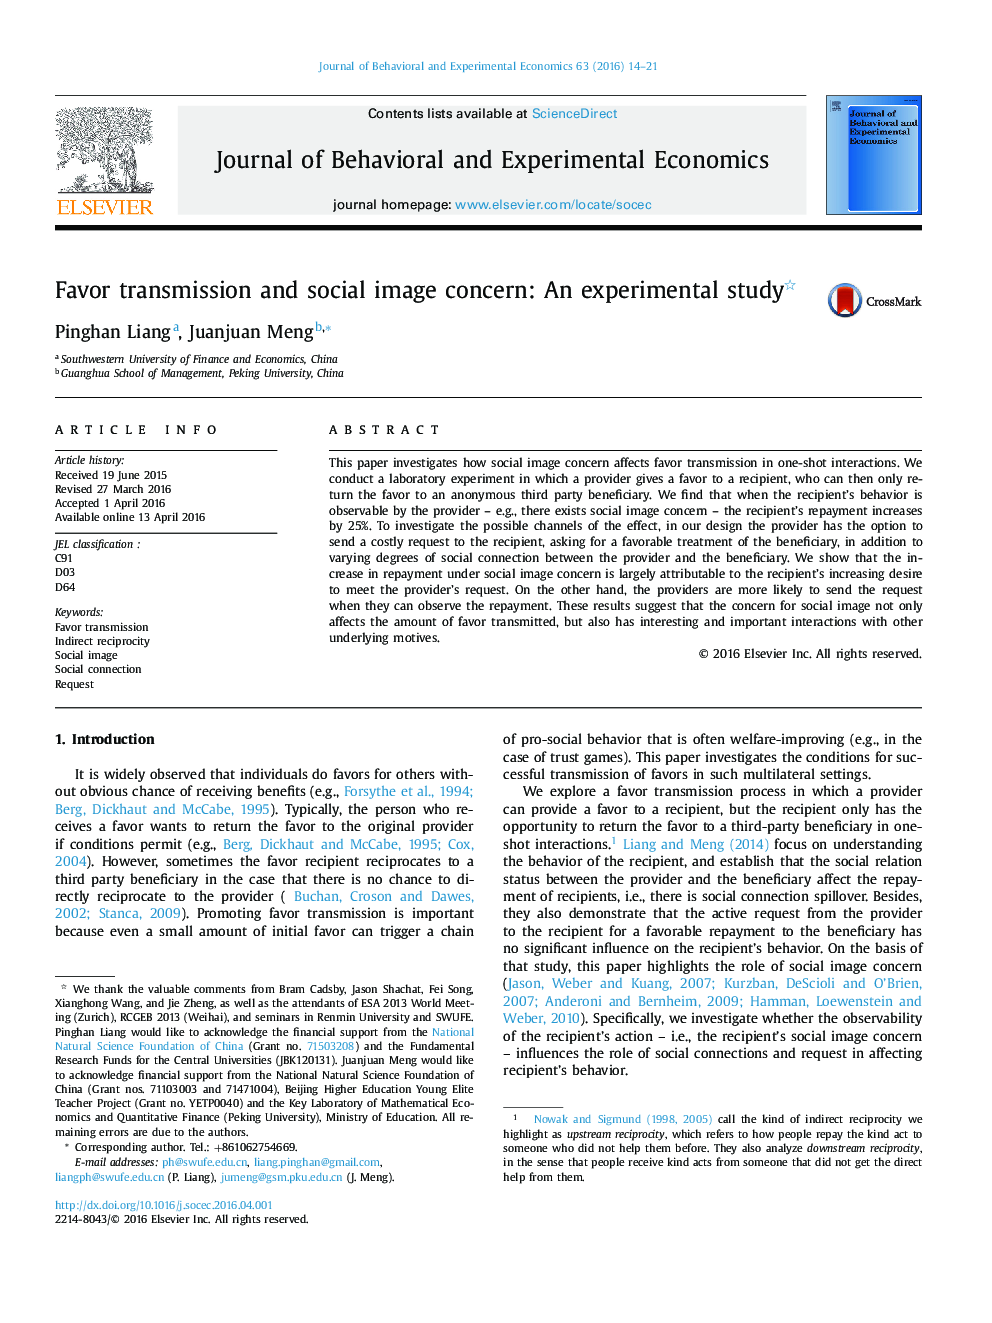 Favor transmission and social image concern: An experimental study 